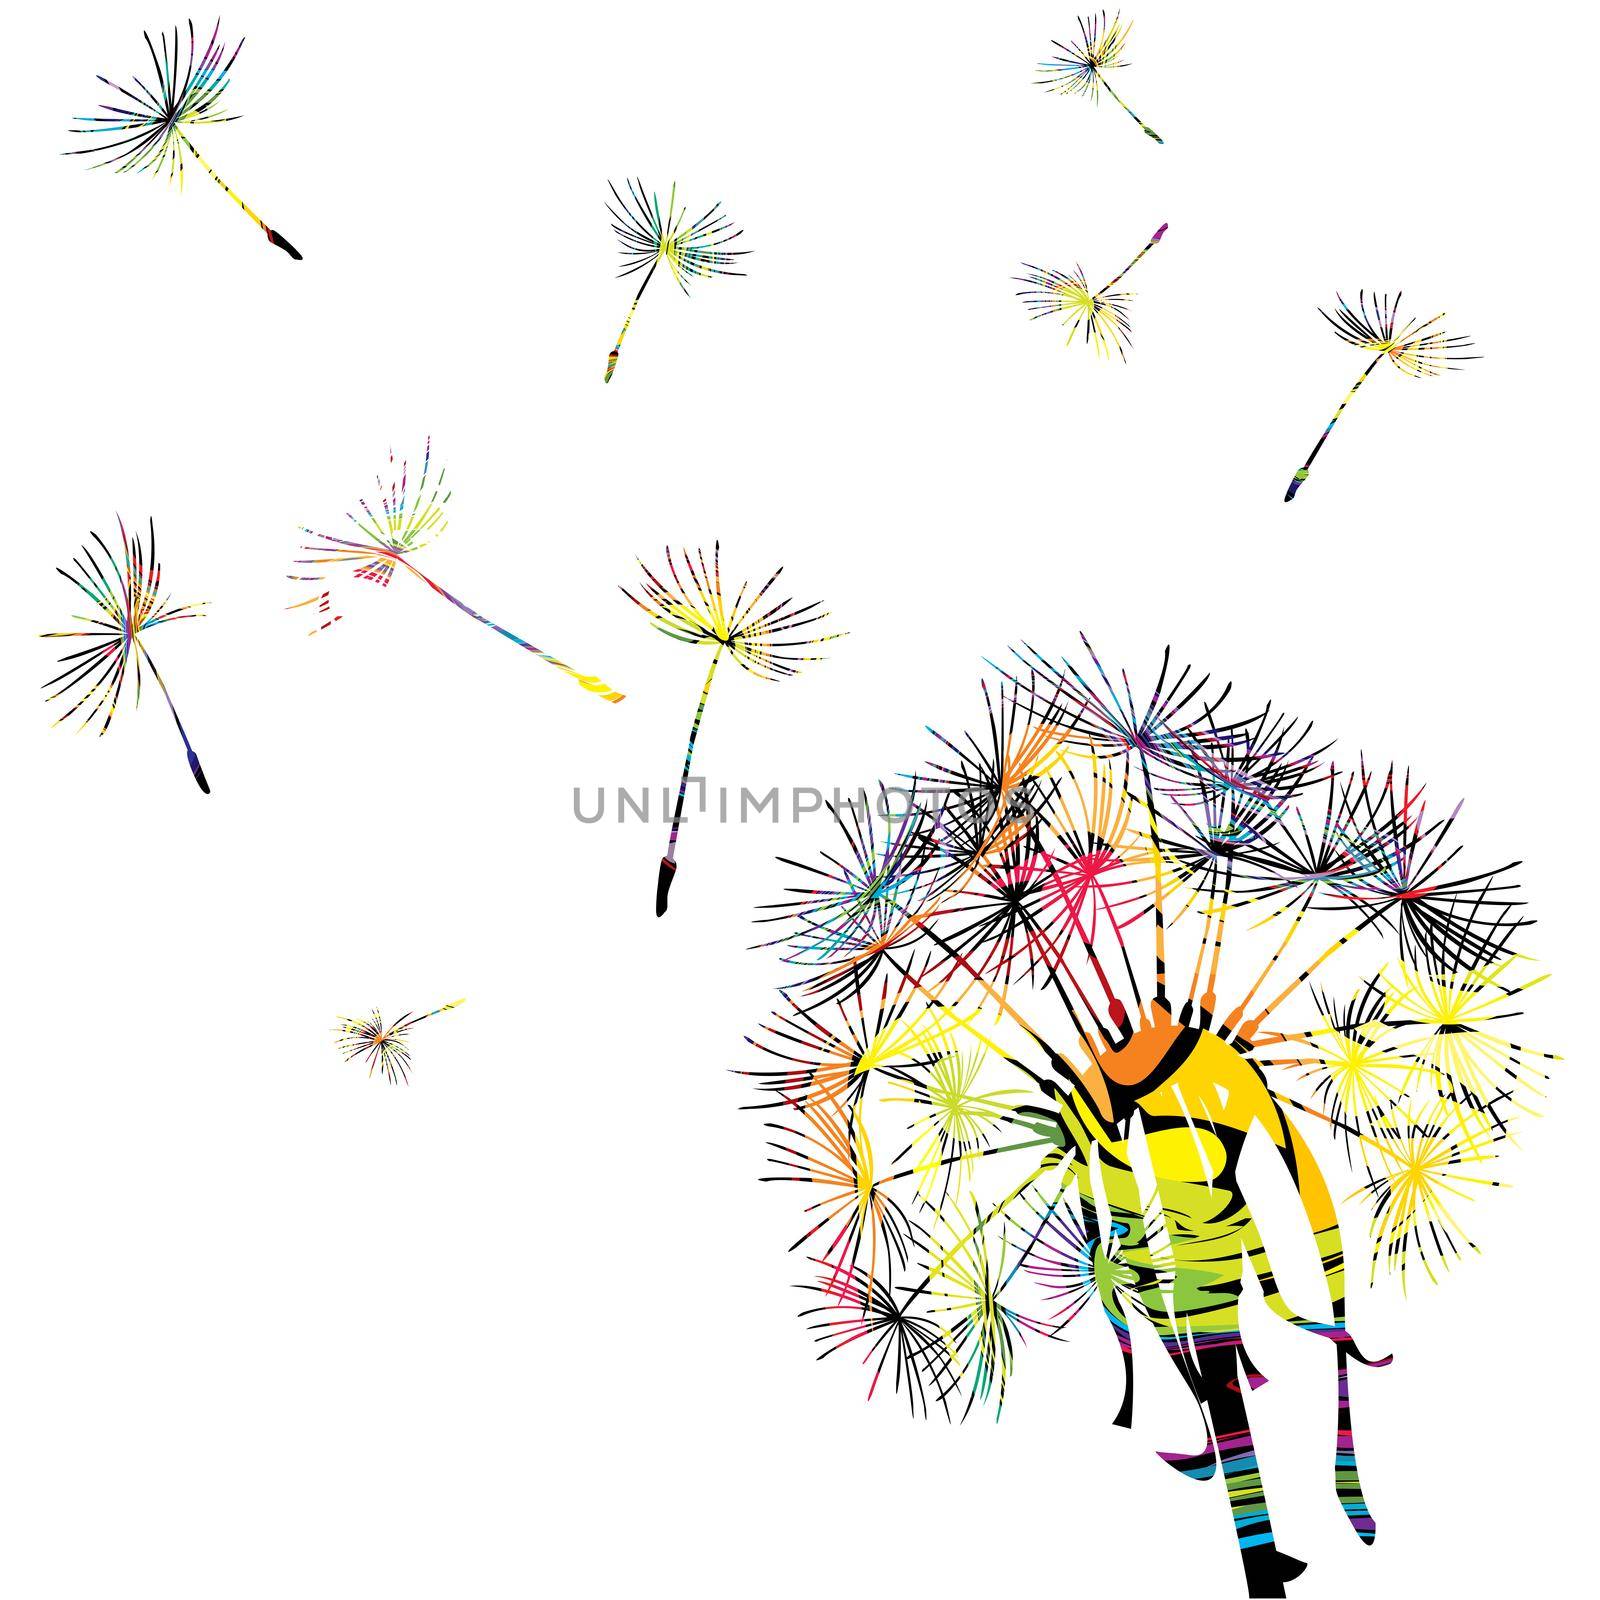 Colorful dandelion with flying seeds by hibrida13